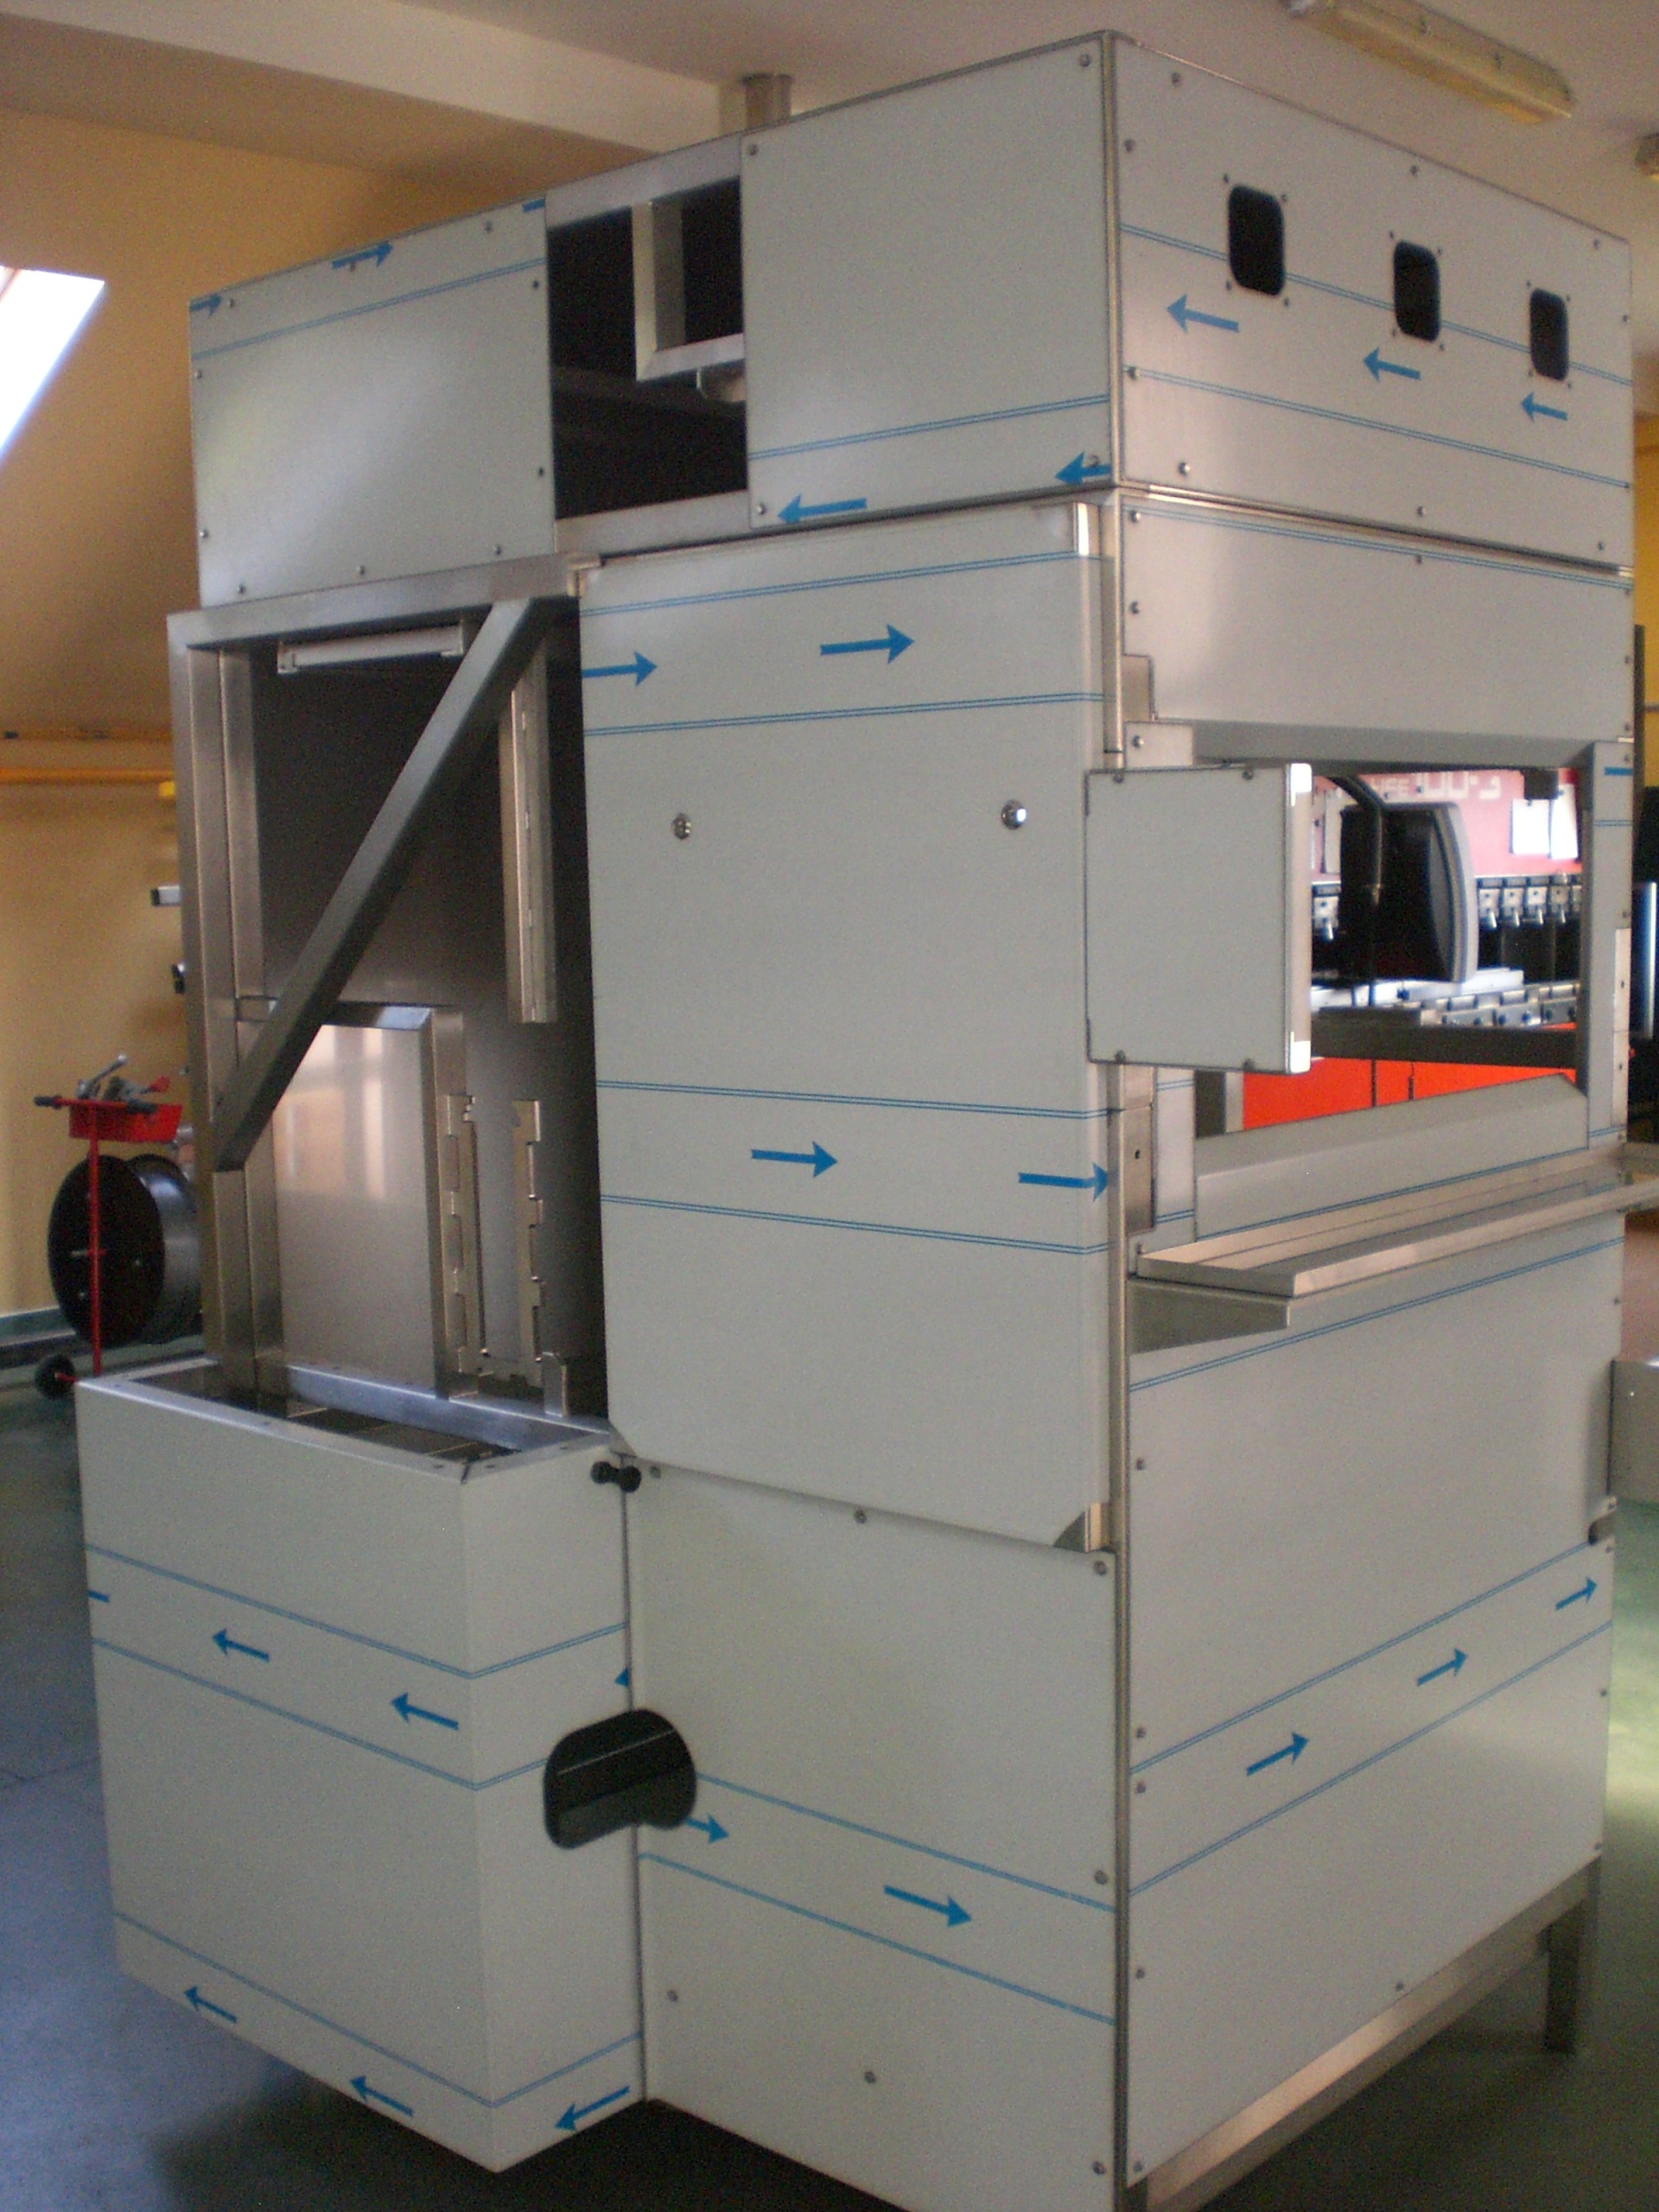 Modular bakery equipment for the food industry.